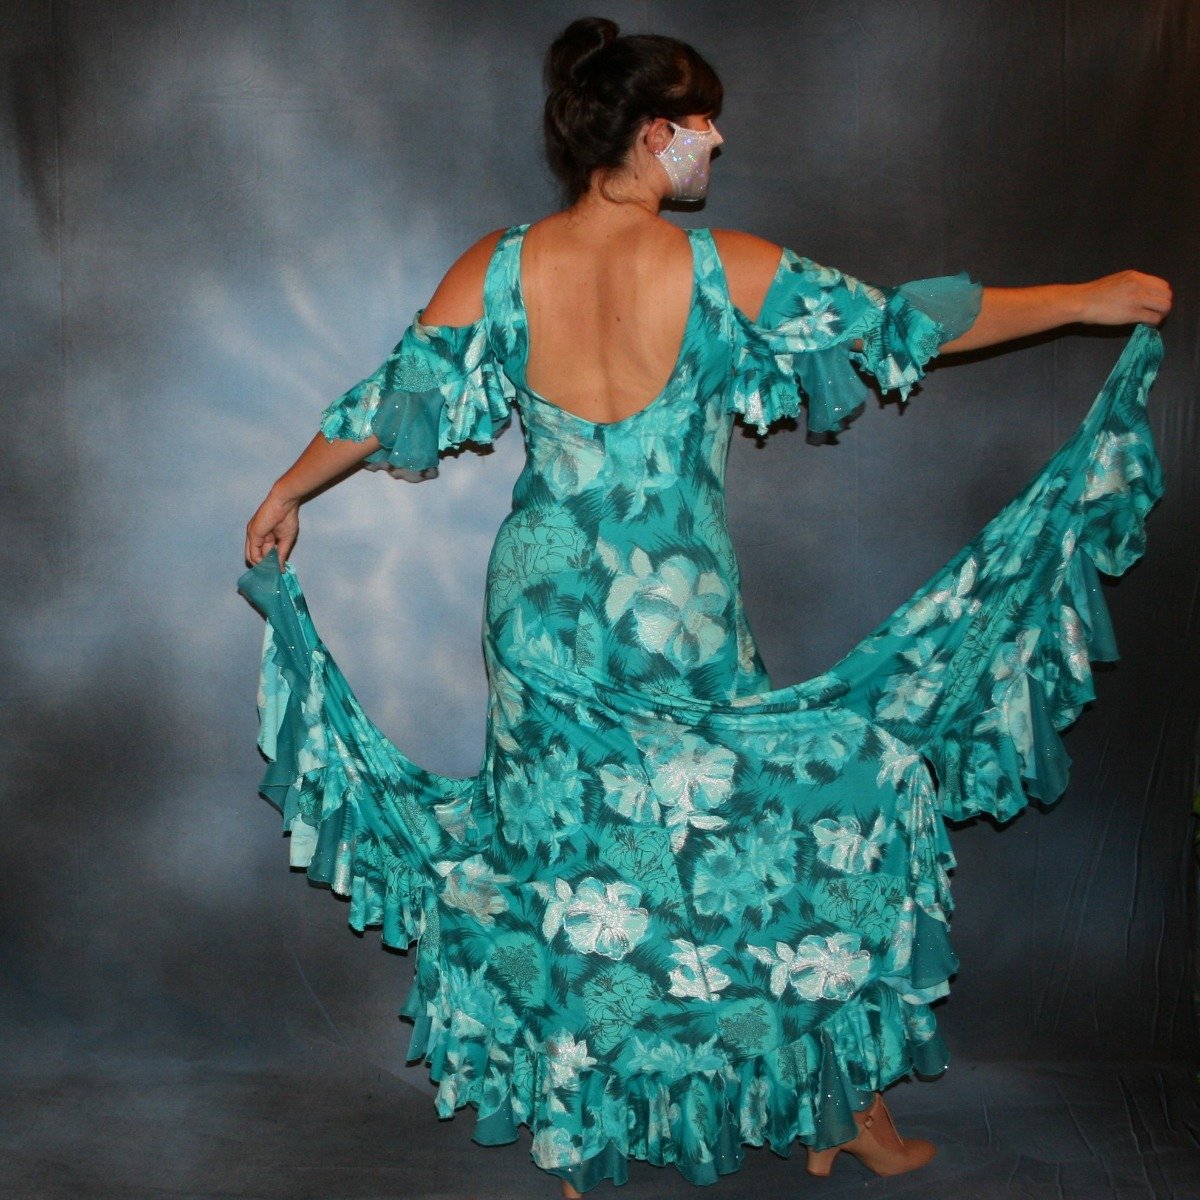 Crystal's Creations back view of Gorgeous teal tropical print social ballroom dress created in tropical lycra print in shades of teal with a bit of silver sheen accents...absolutely gorgeous fabric! This social ballroom dress features very full skirting with 2 slits & oodles of flounces of the same teal tropical print lycra with intermittent flounces of teal glitter chiffon...along with draping, cold shoulder flounce sleeves...and a low back